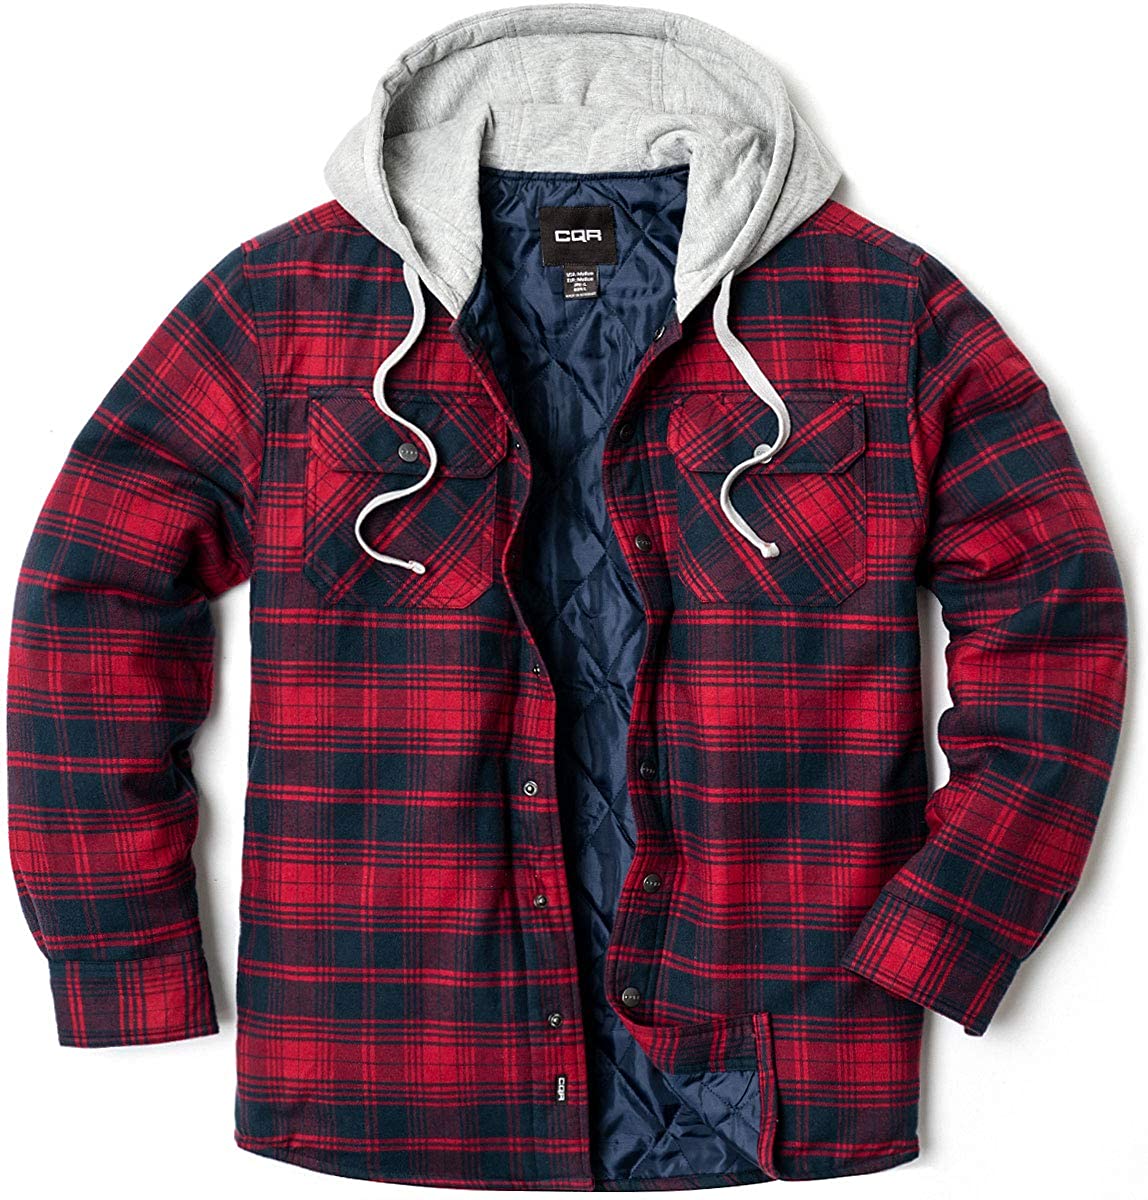 Men's Wrangler® Heavyweight Plaid Sherpa Lined Shirt Jacket | Mens Warm  Quilted Lined Cotton Jackets With Hood Button Down Zipper Long Sleeve Plaid  Jackets 